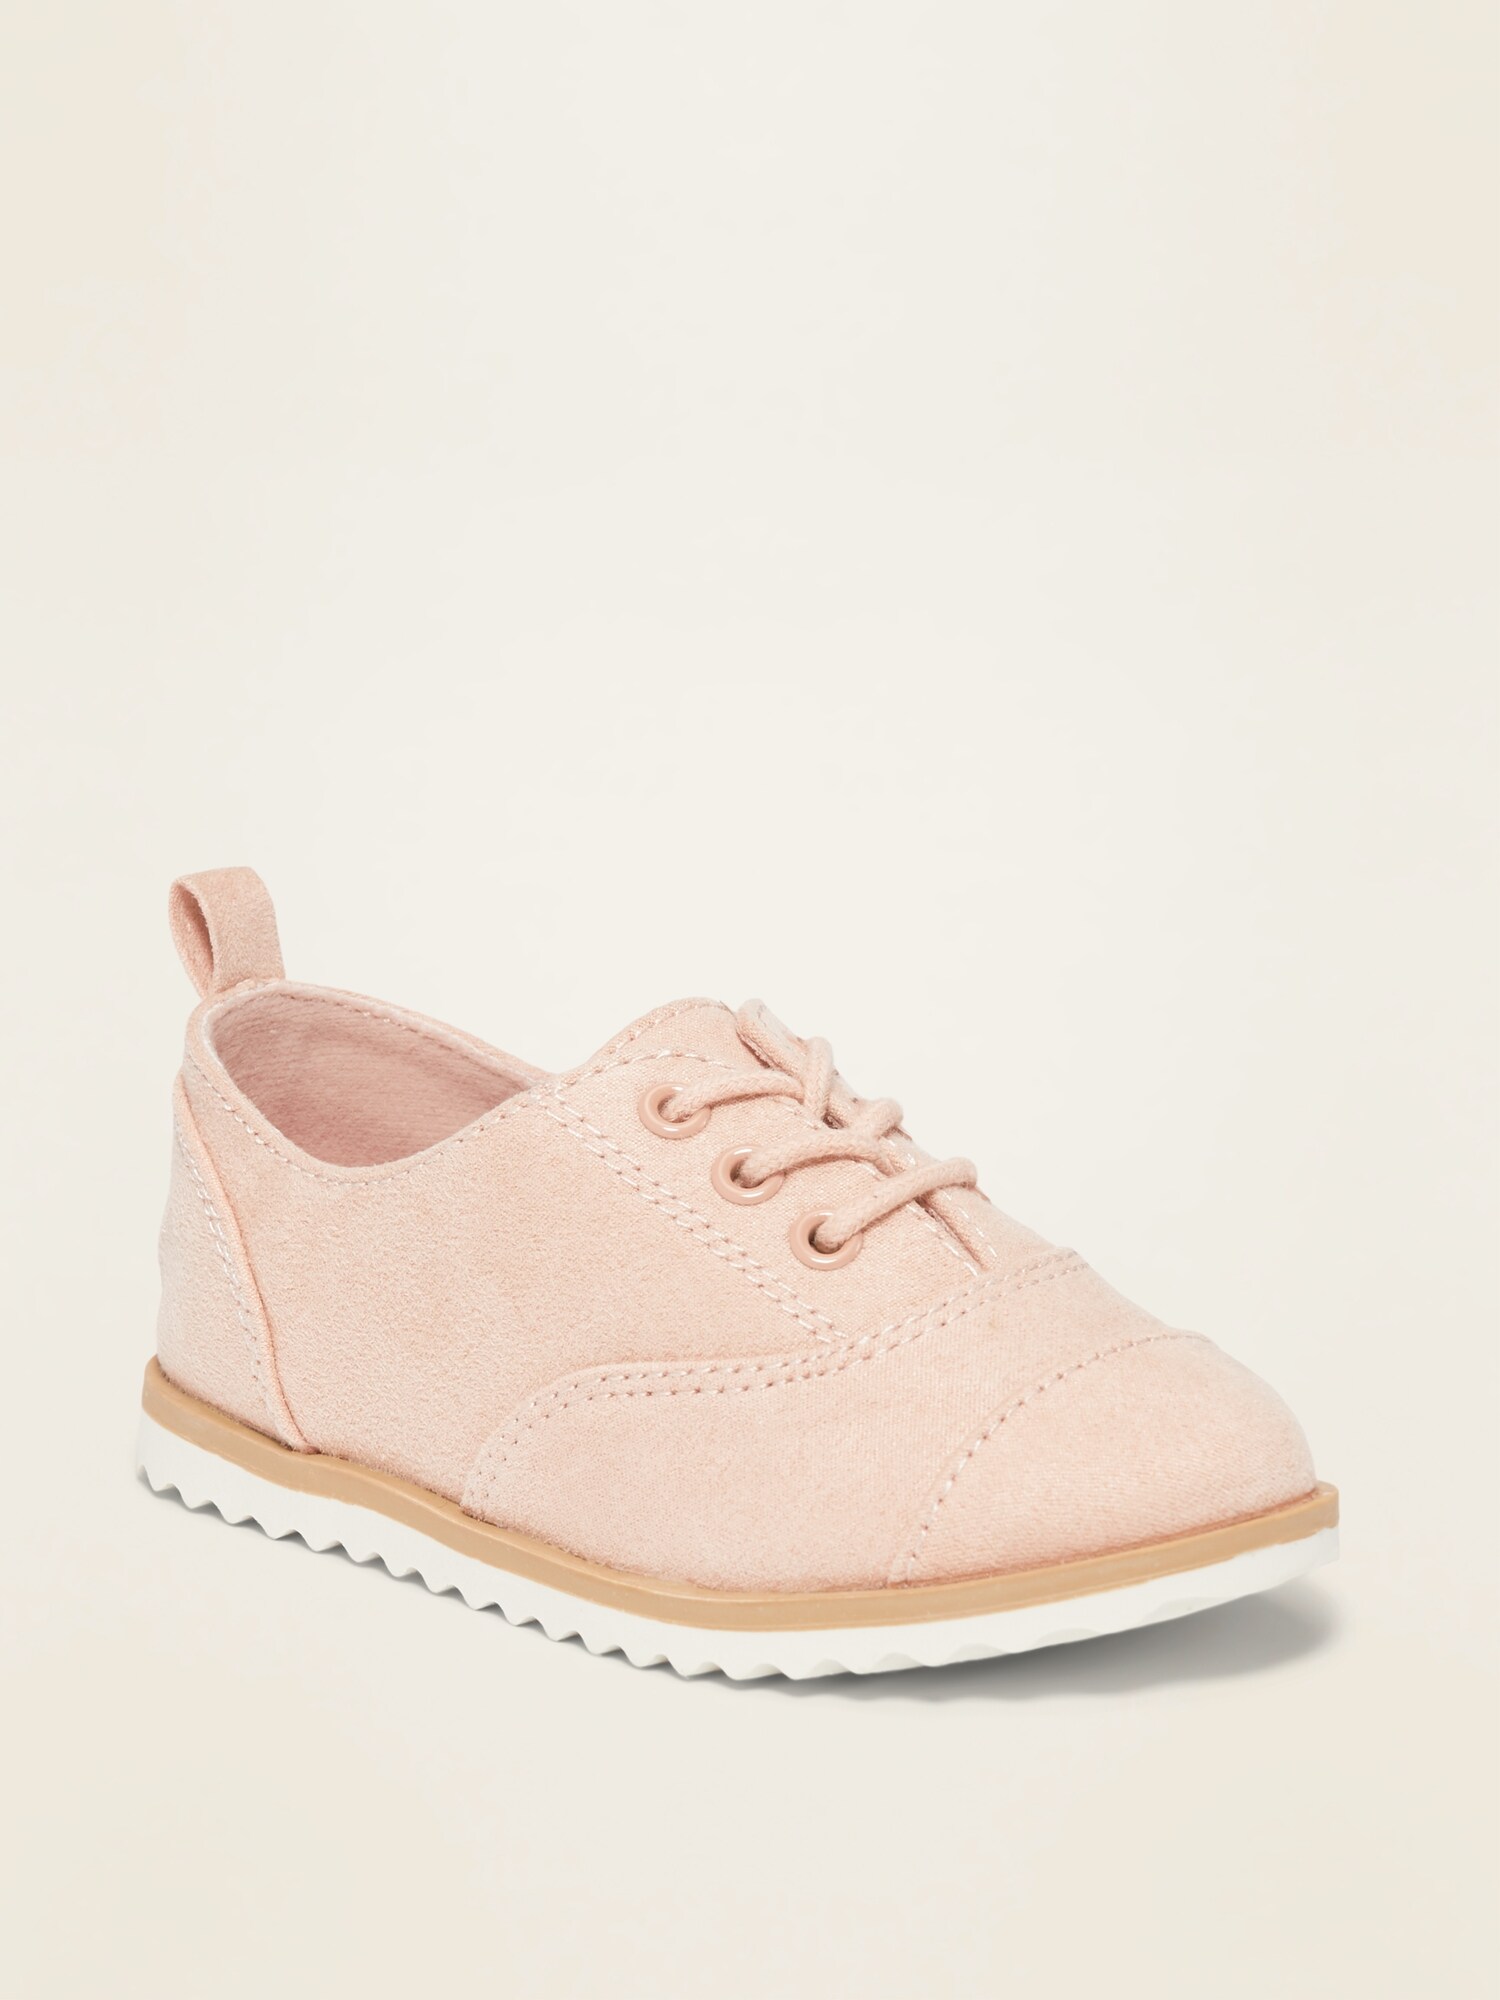 old navy oxford shoes